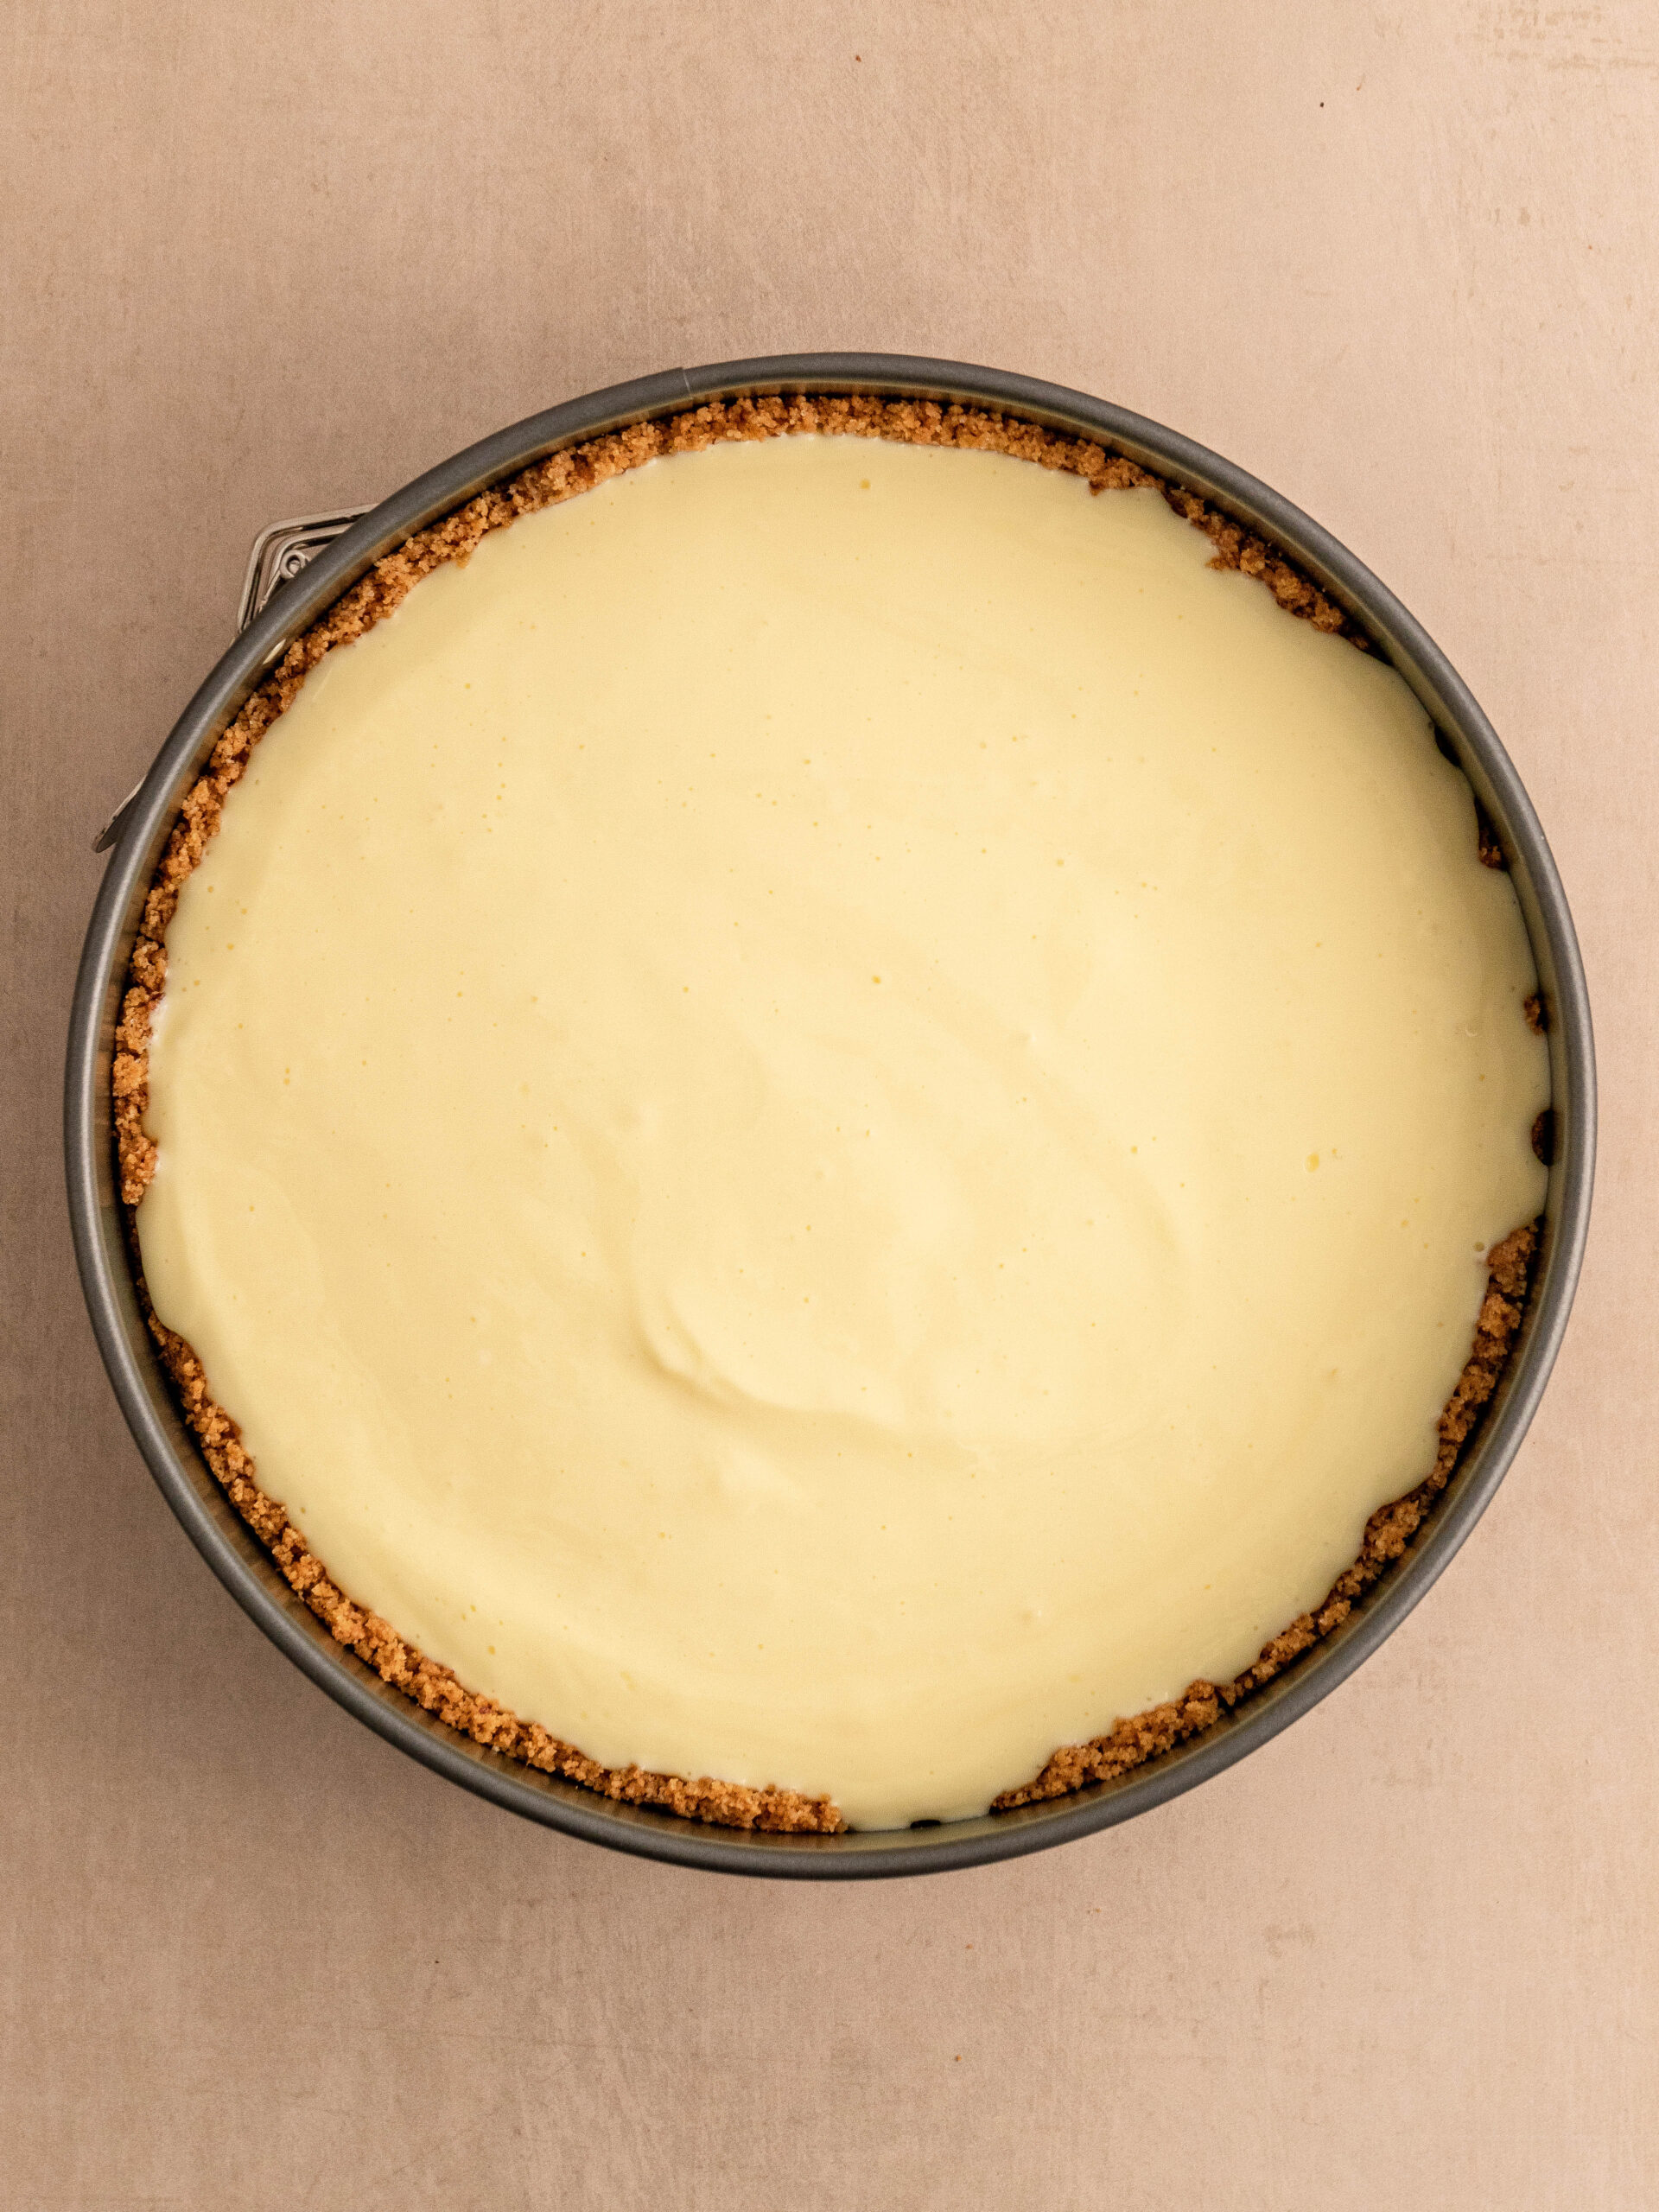 Step 6. Pour the cheesecake batter into the spring-form and bake it.